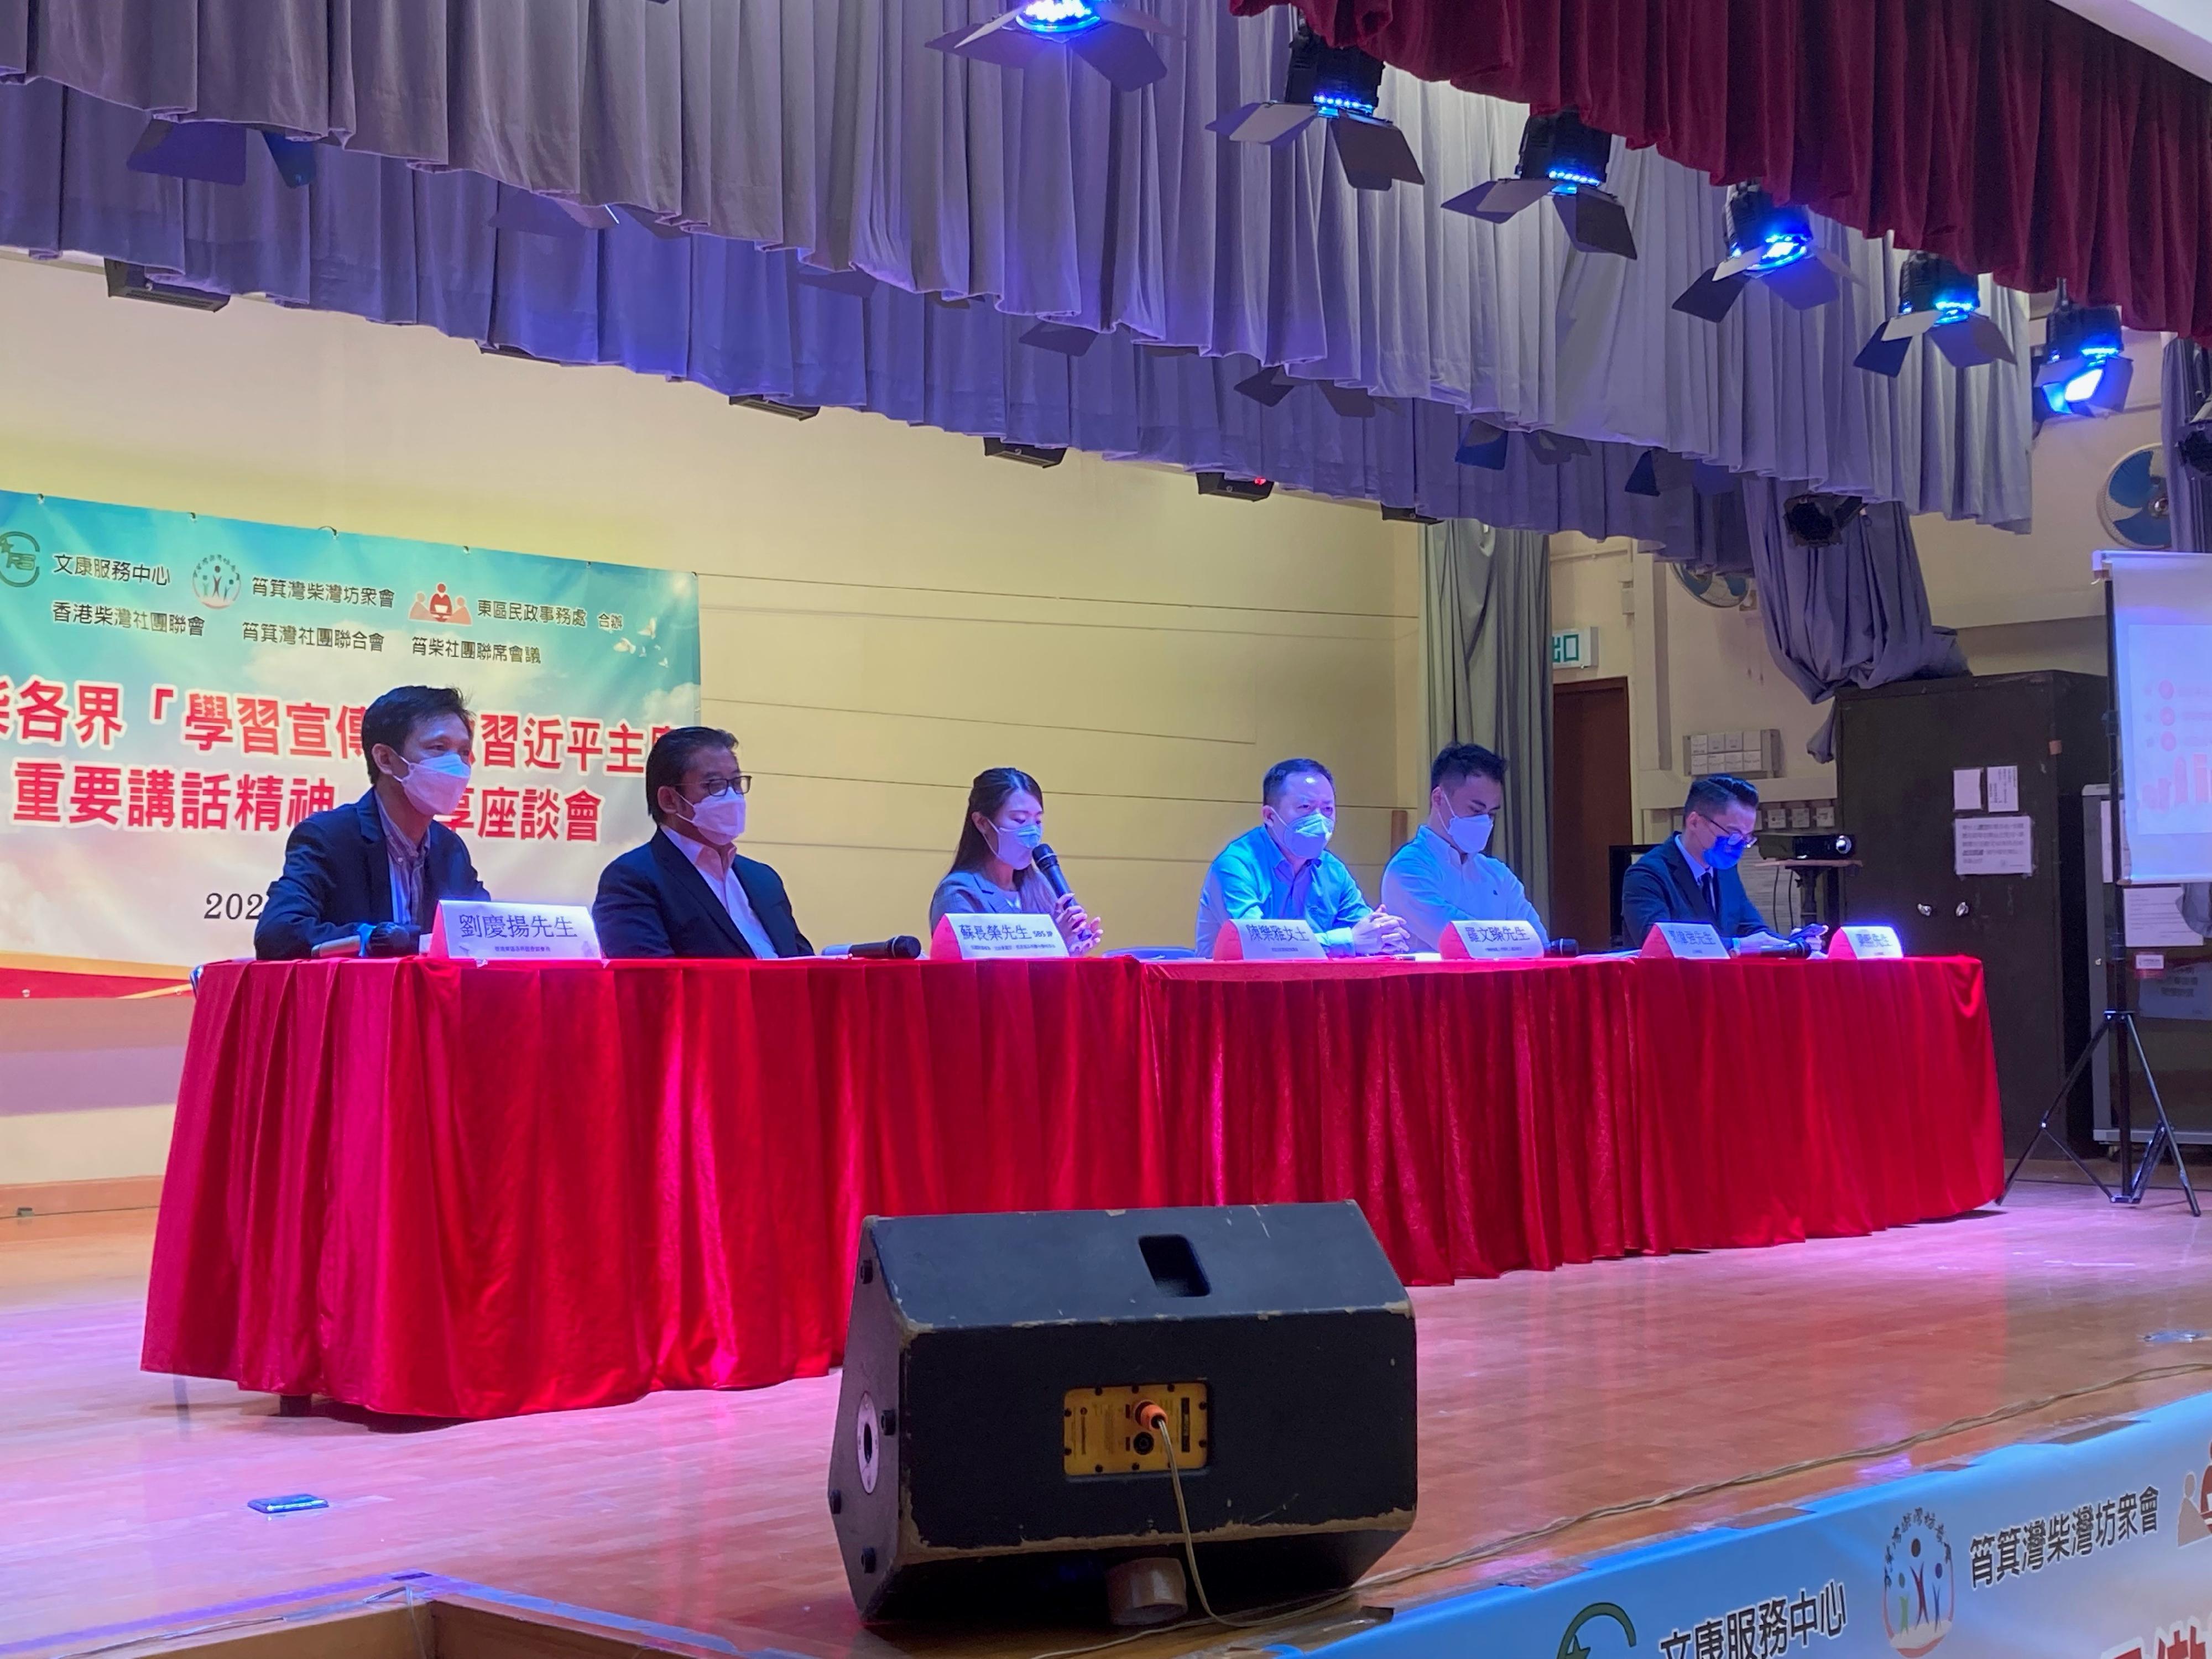 The Eastern District Office, together with the Cultural and Recreational Services Centre, the Shaukiwan and Chaiwan Residents Fraternal Association, the Federation of Hong Kong Chai Wan Area Societies, the Federation of Shau Ki Wan Association and the Joint Committee of Shaukiwan and Chaiwan Associations, today (July 22) held the "Sharing Session to Learn About, Promote and Implement the Spirit of President Xi's Important Speech" at Hing Wah Community Hall.  Photo shows Assistant District Officer (Eastern) Ms Joyce Chan (third left), delivering a speech at the session.